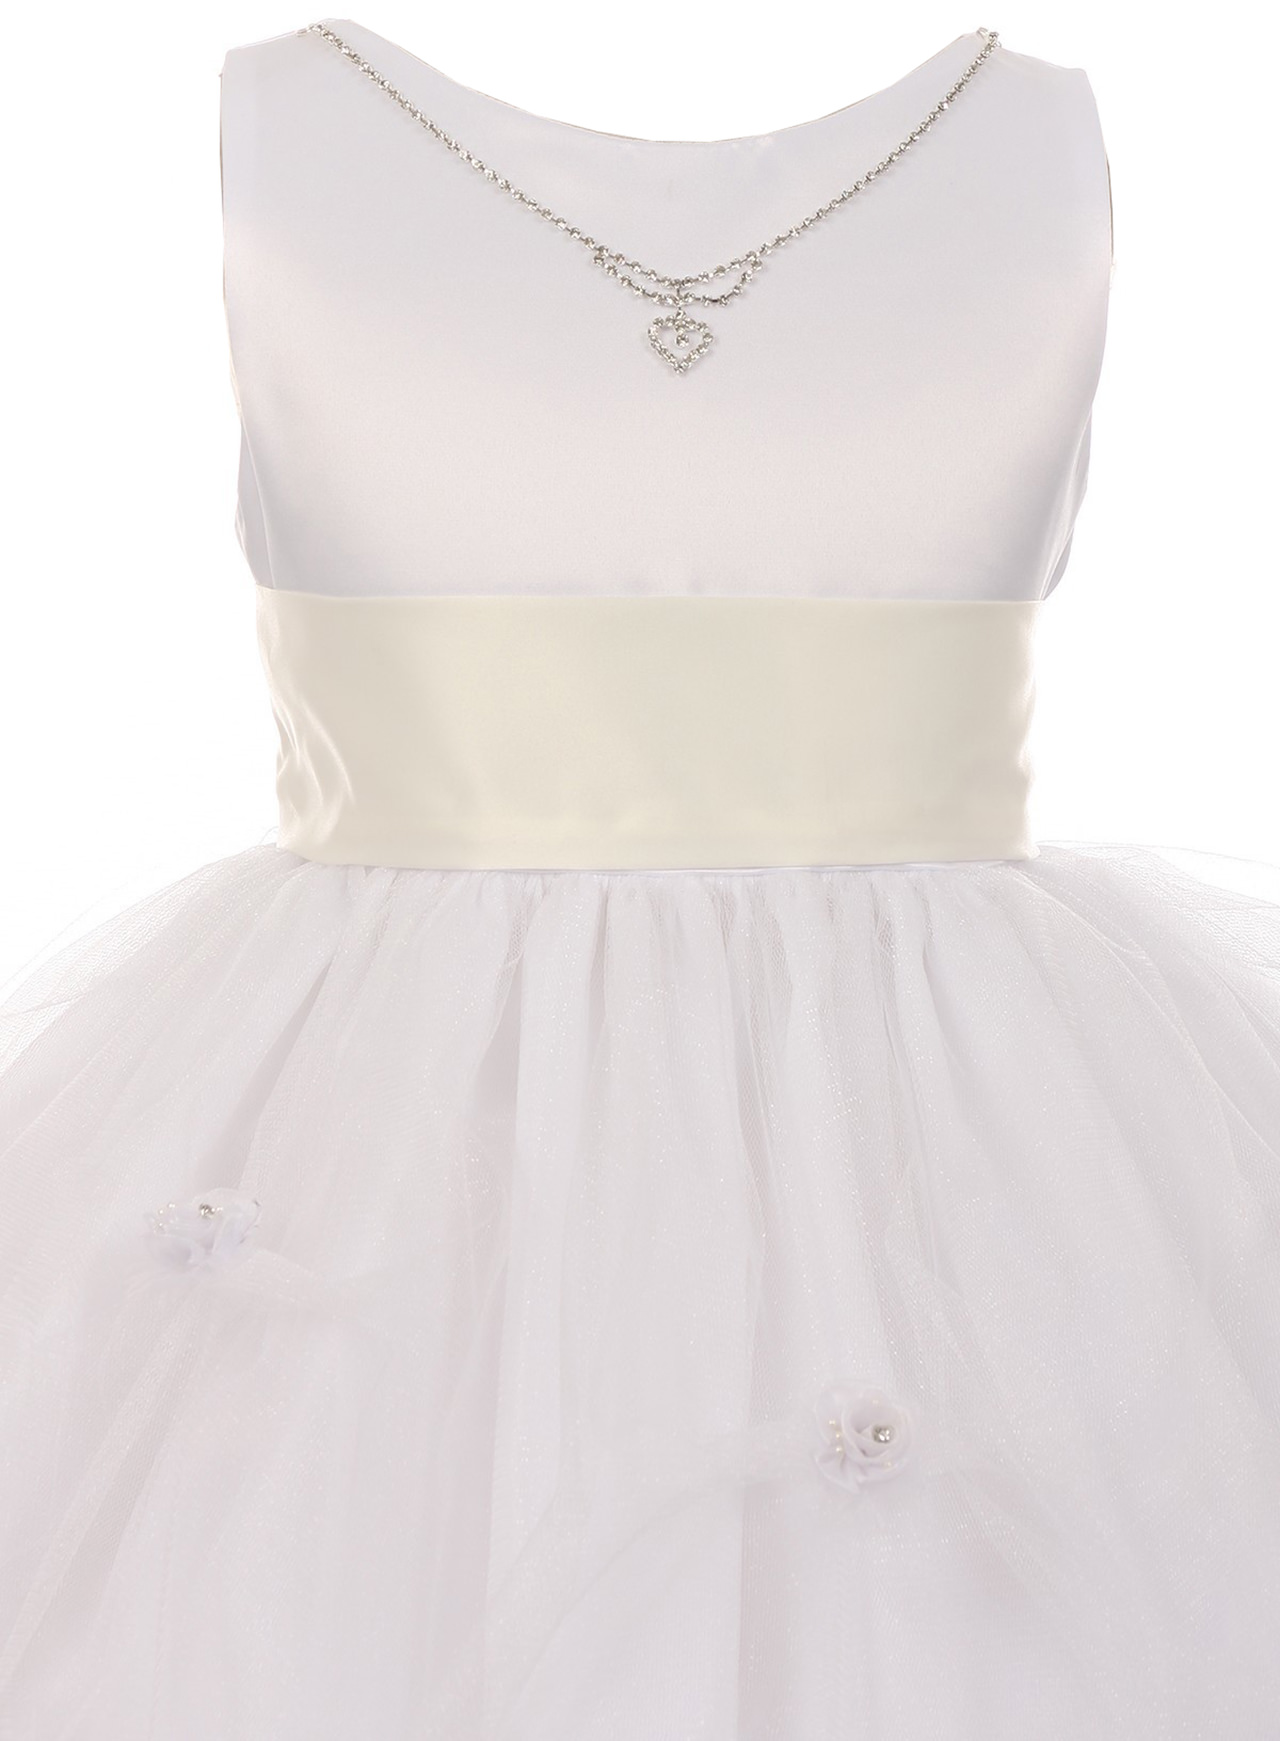 Big Girls' Sleeveless Crystal Necklace Tulle Pageant Communion Flower Girl Dress Red 10 (C01B16W) - image 3 of 3